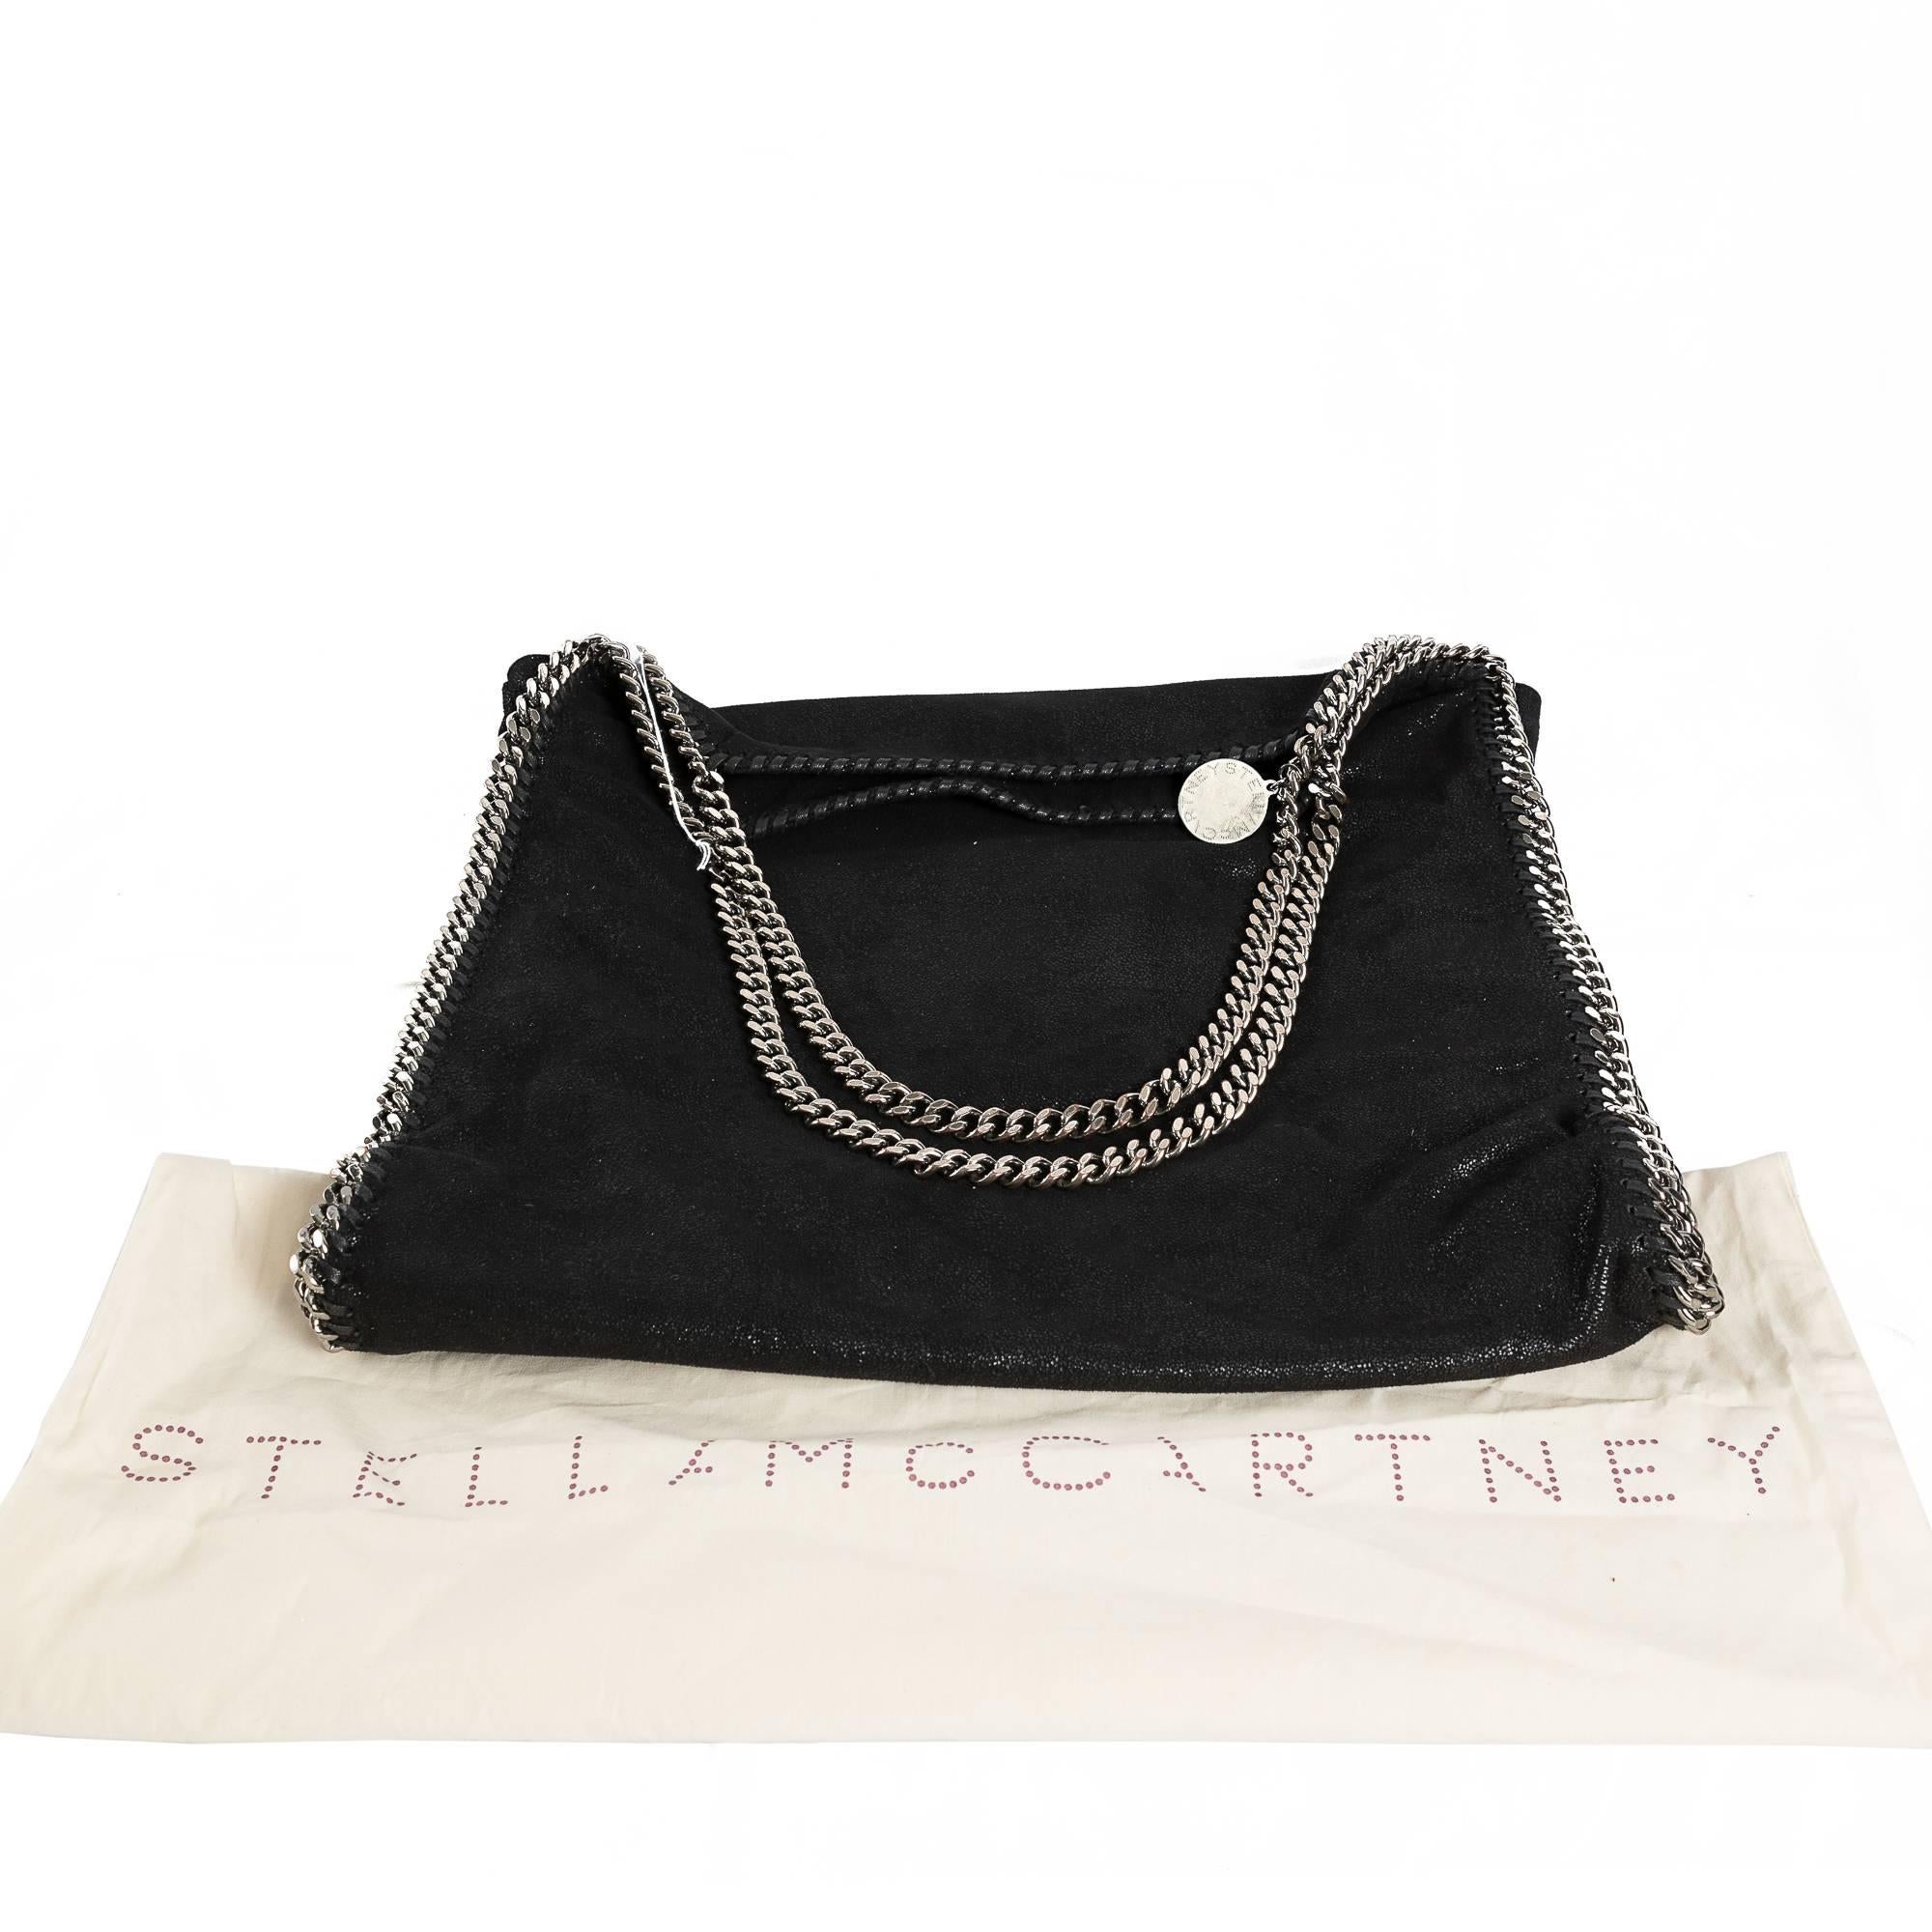 Stella McCartney Falabella Tote Bag in black Shaggy Deer and in ruthenium hardware.
Big size.
Perfect conditions, like new.
The bag comes with its dustbag.